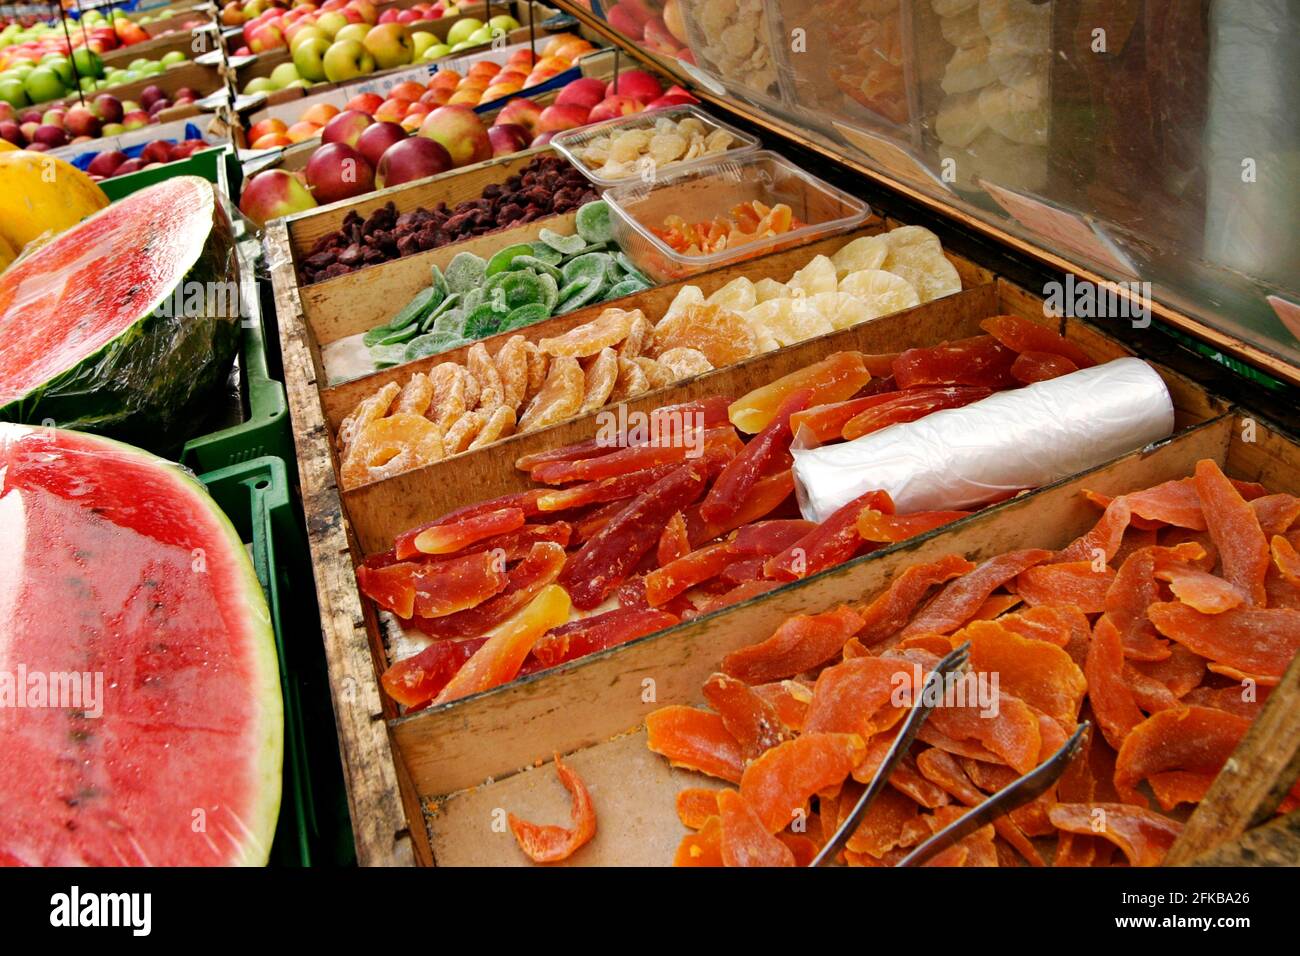 candy and fresh fruits at a market stand Stock Photo